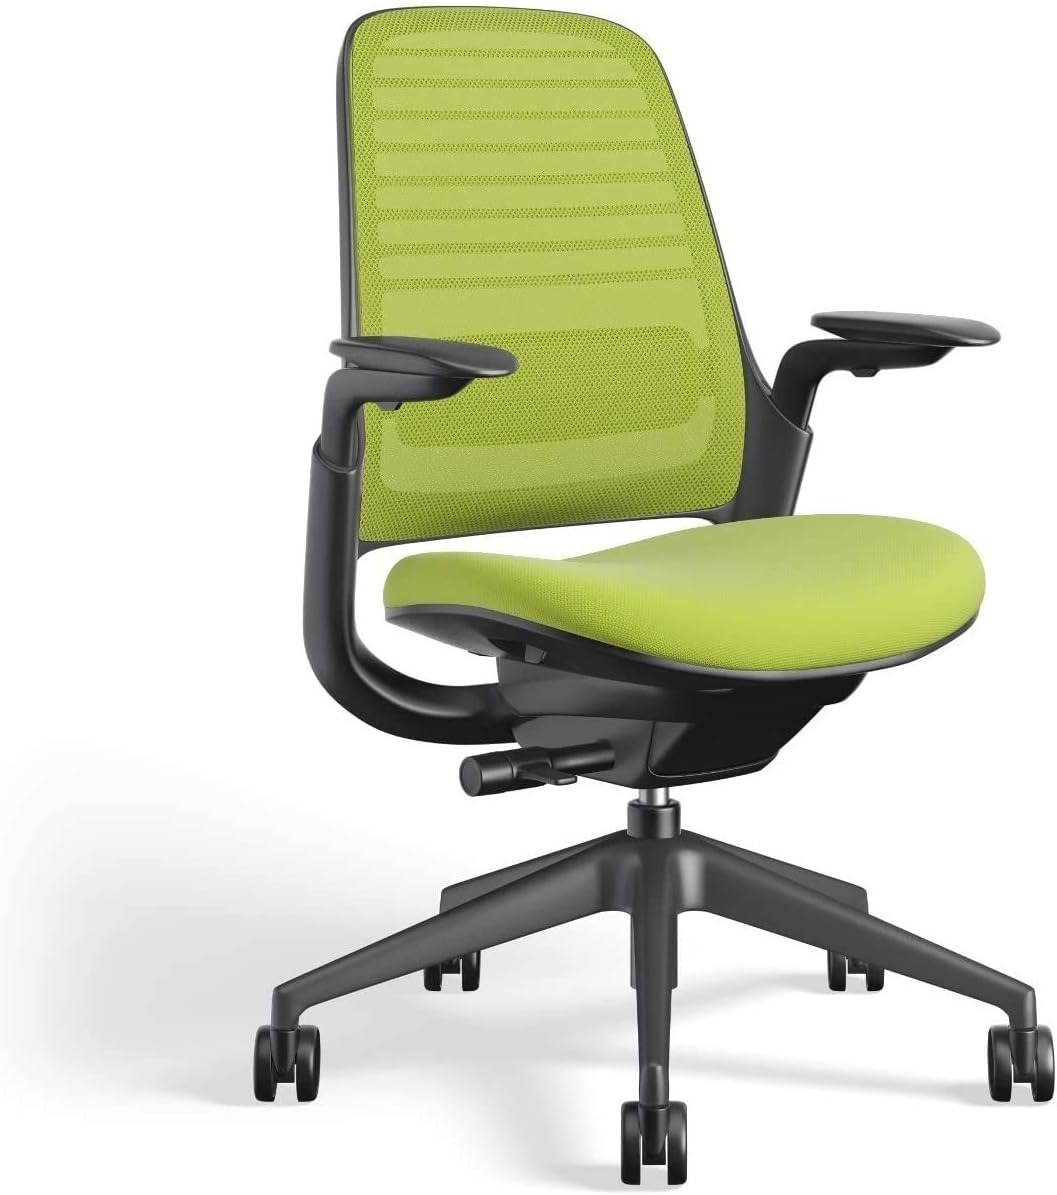 bright green office chair with mesh backrest and padded seat, adjustable armrests on wheels